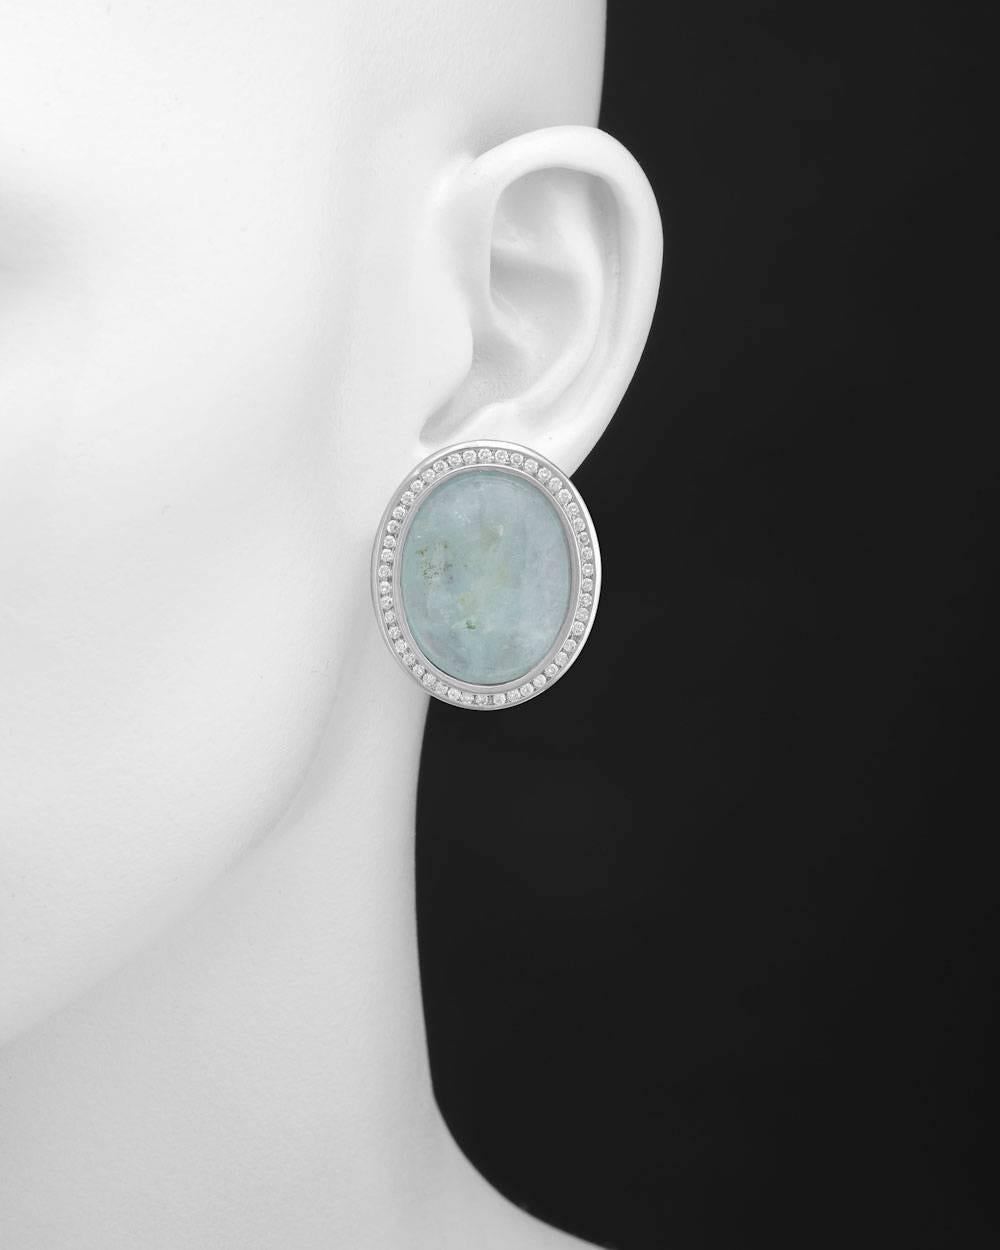 Oval-shaped aquamarine and diamond earrings, composed of a large cabochon-cut aquamarine surrounded by round diamonds, the pair of aquamarines weighing approximately 68 total carats and diamonds weighing approximately 1.84 total carats, mounted in